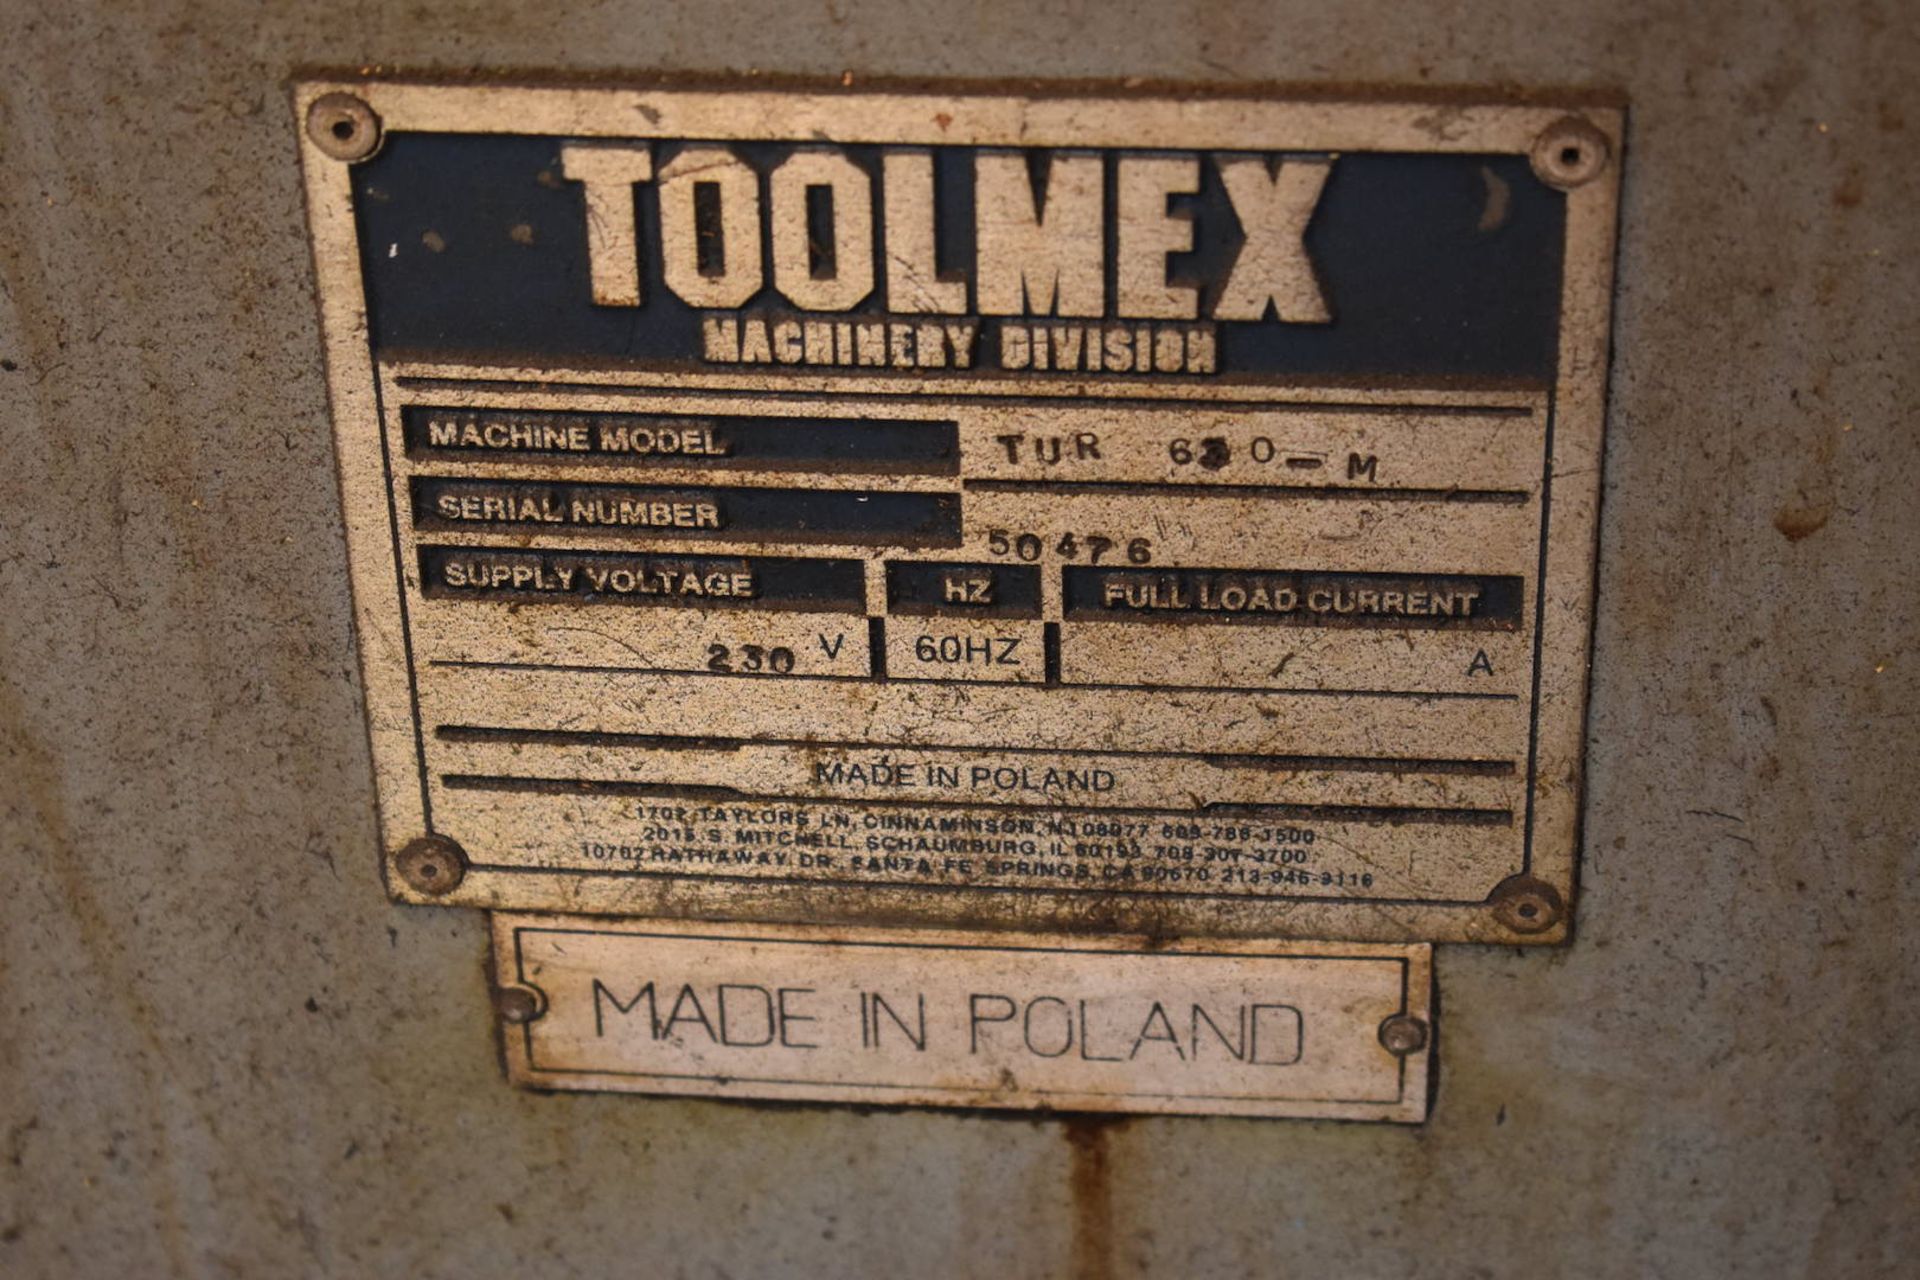 Toolmex 24 in. x 120 in. (approx.) Model TUR630M Engine Lathe, S/N 50476 (approx. 1997), Motorized - Image 10 of 12